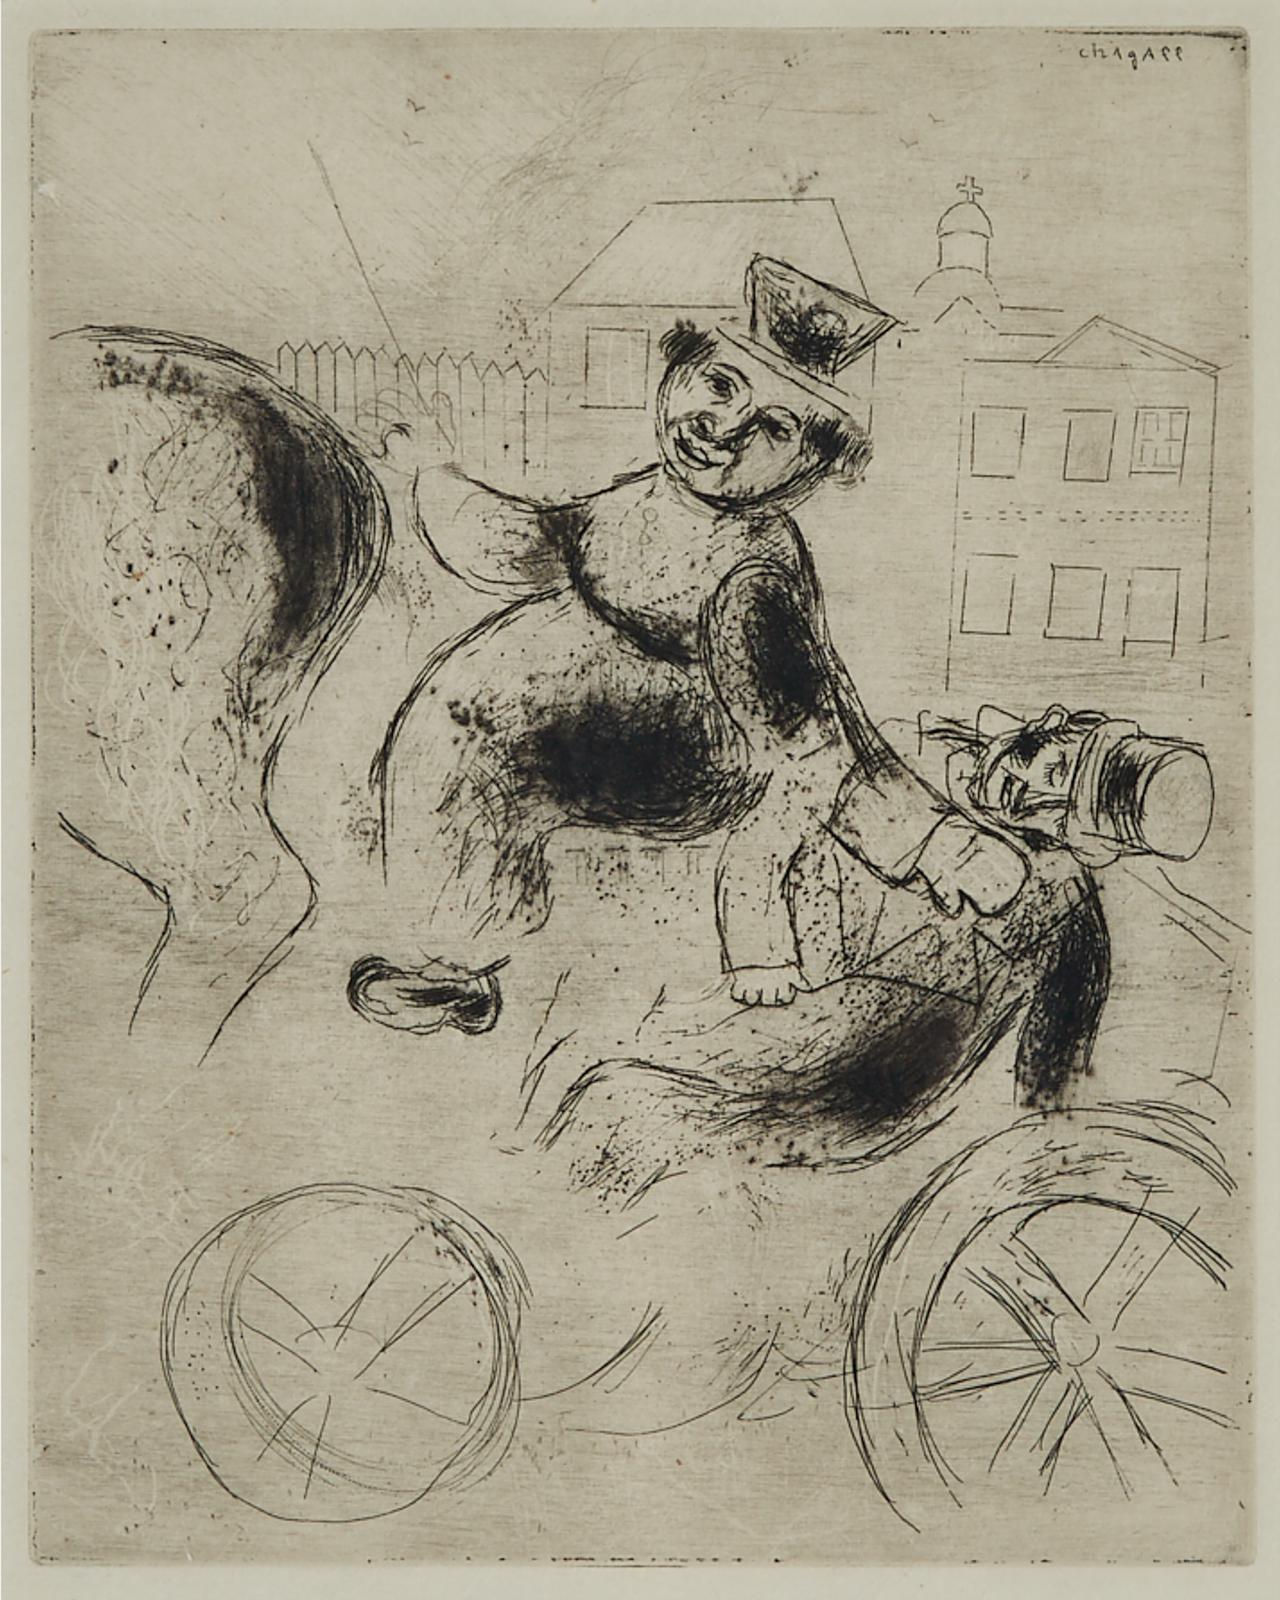 Marc Chagall (1887-1985) - Pavel Ivanovitch Est Ramené À L'auberge (Pavel Ivanovich Is Taken Back To The Inn) From Gogol's 